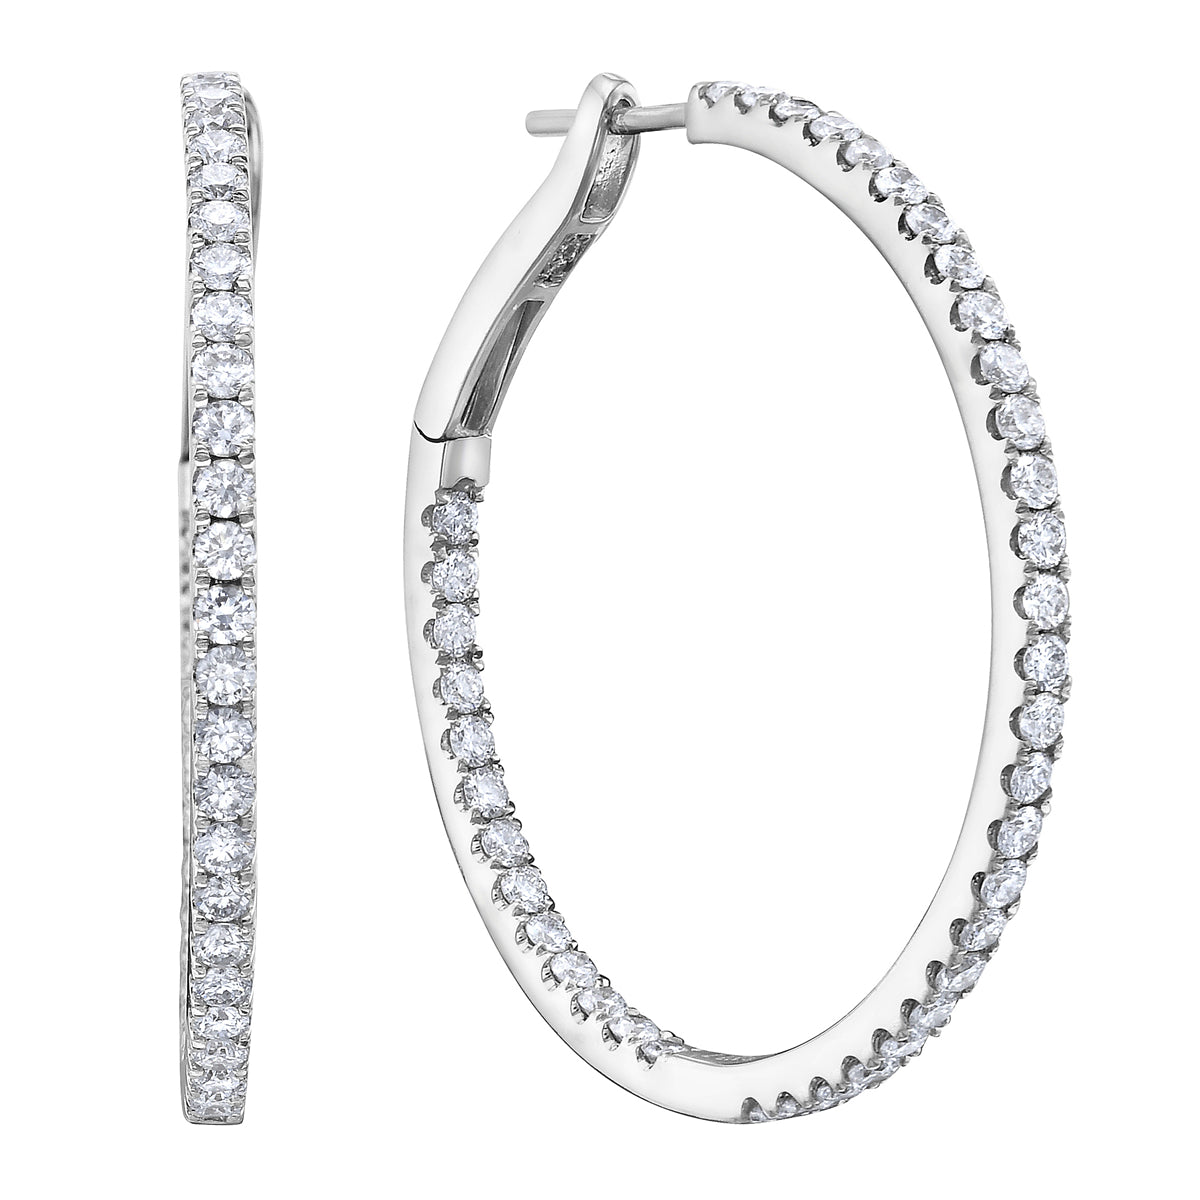 1.25 in White Gold Inside and Out Diamond Hoop Earrings